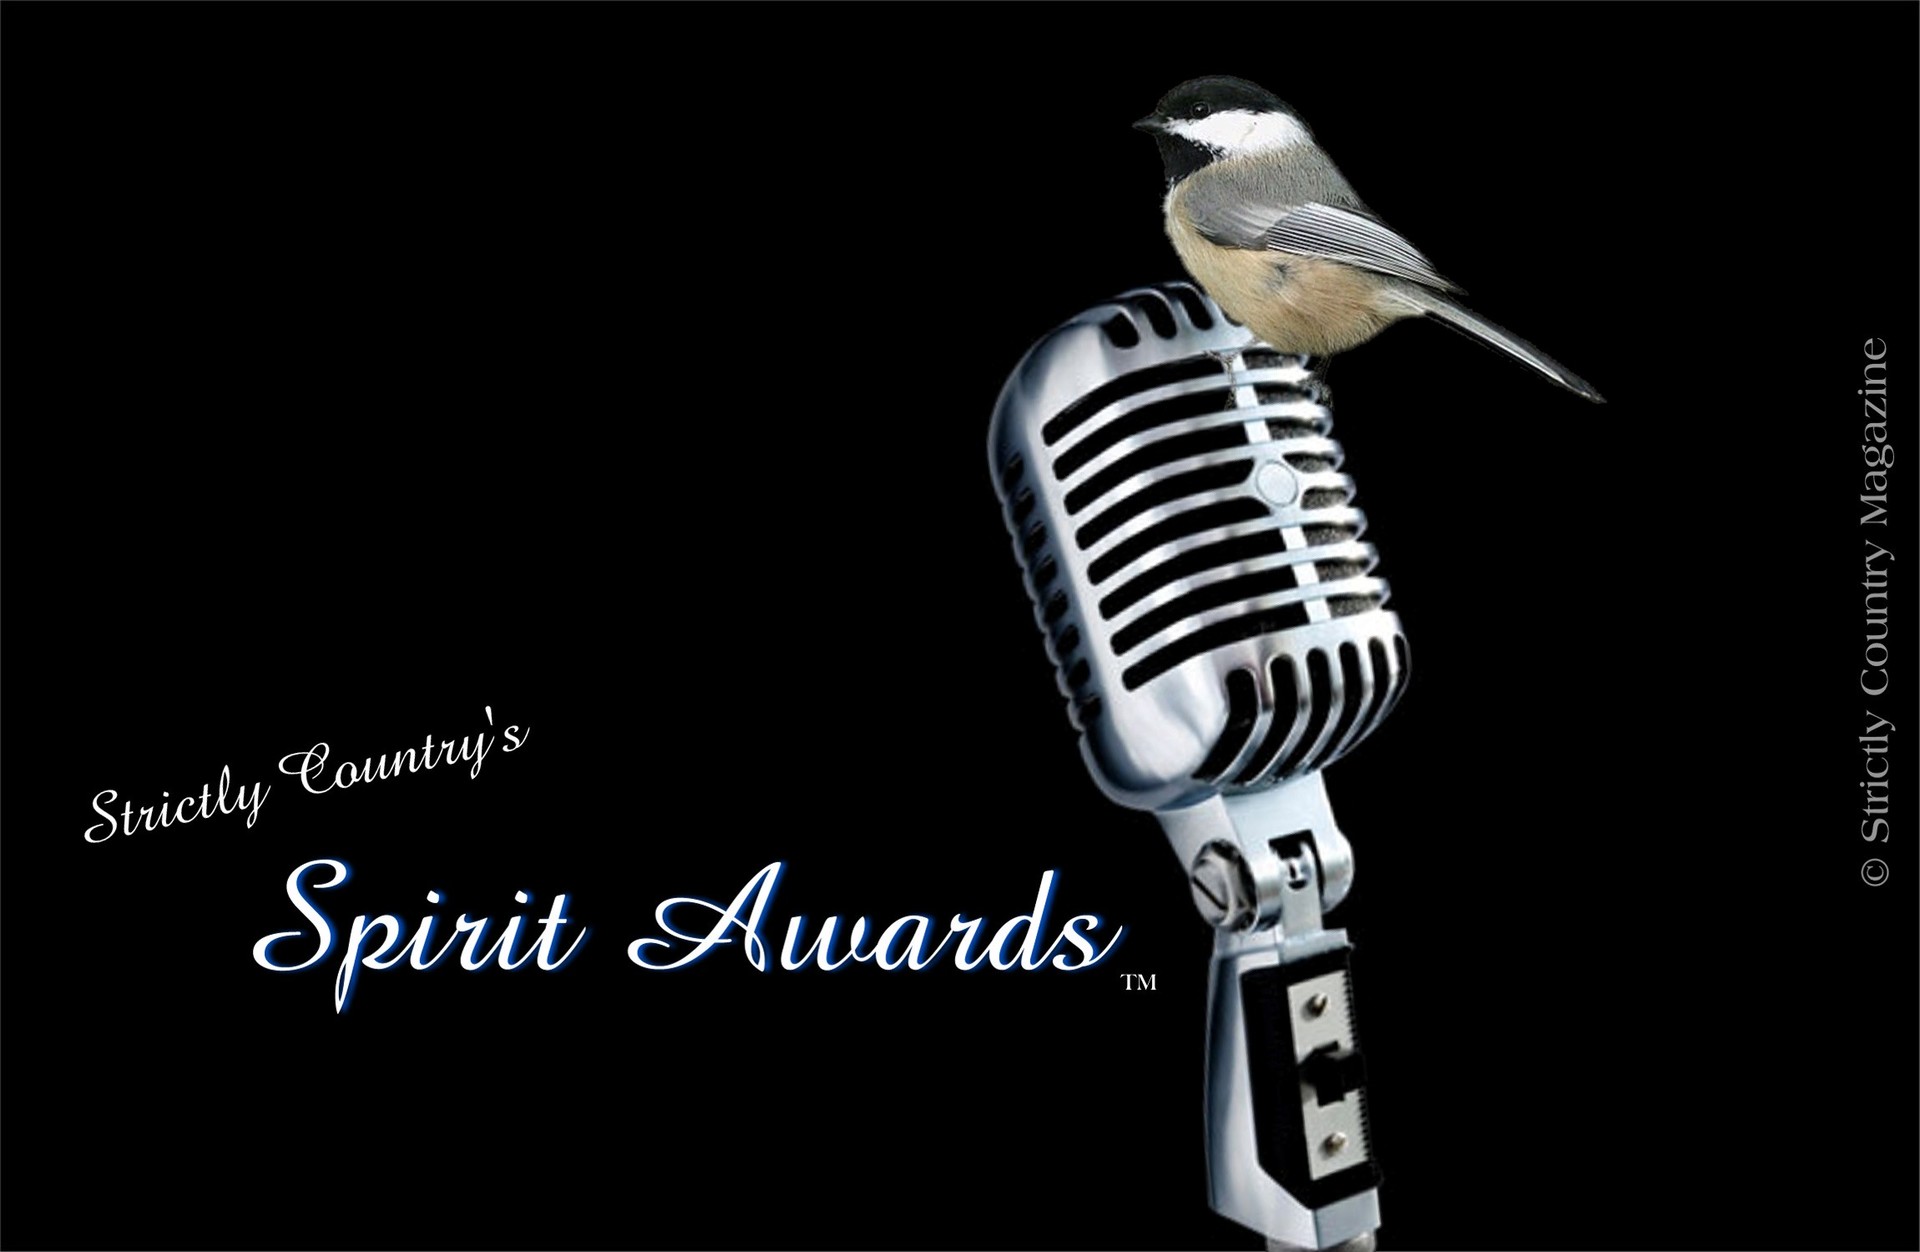 Strictly Country copyright Spirit Awards 